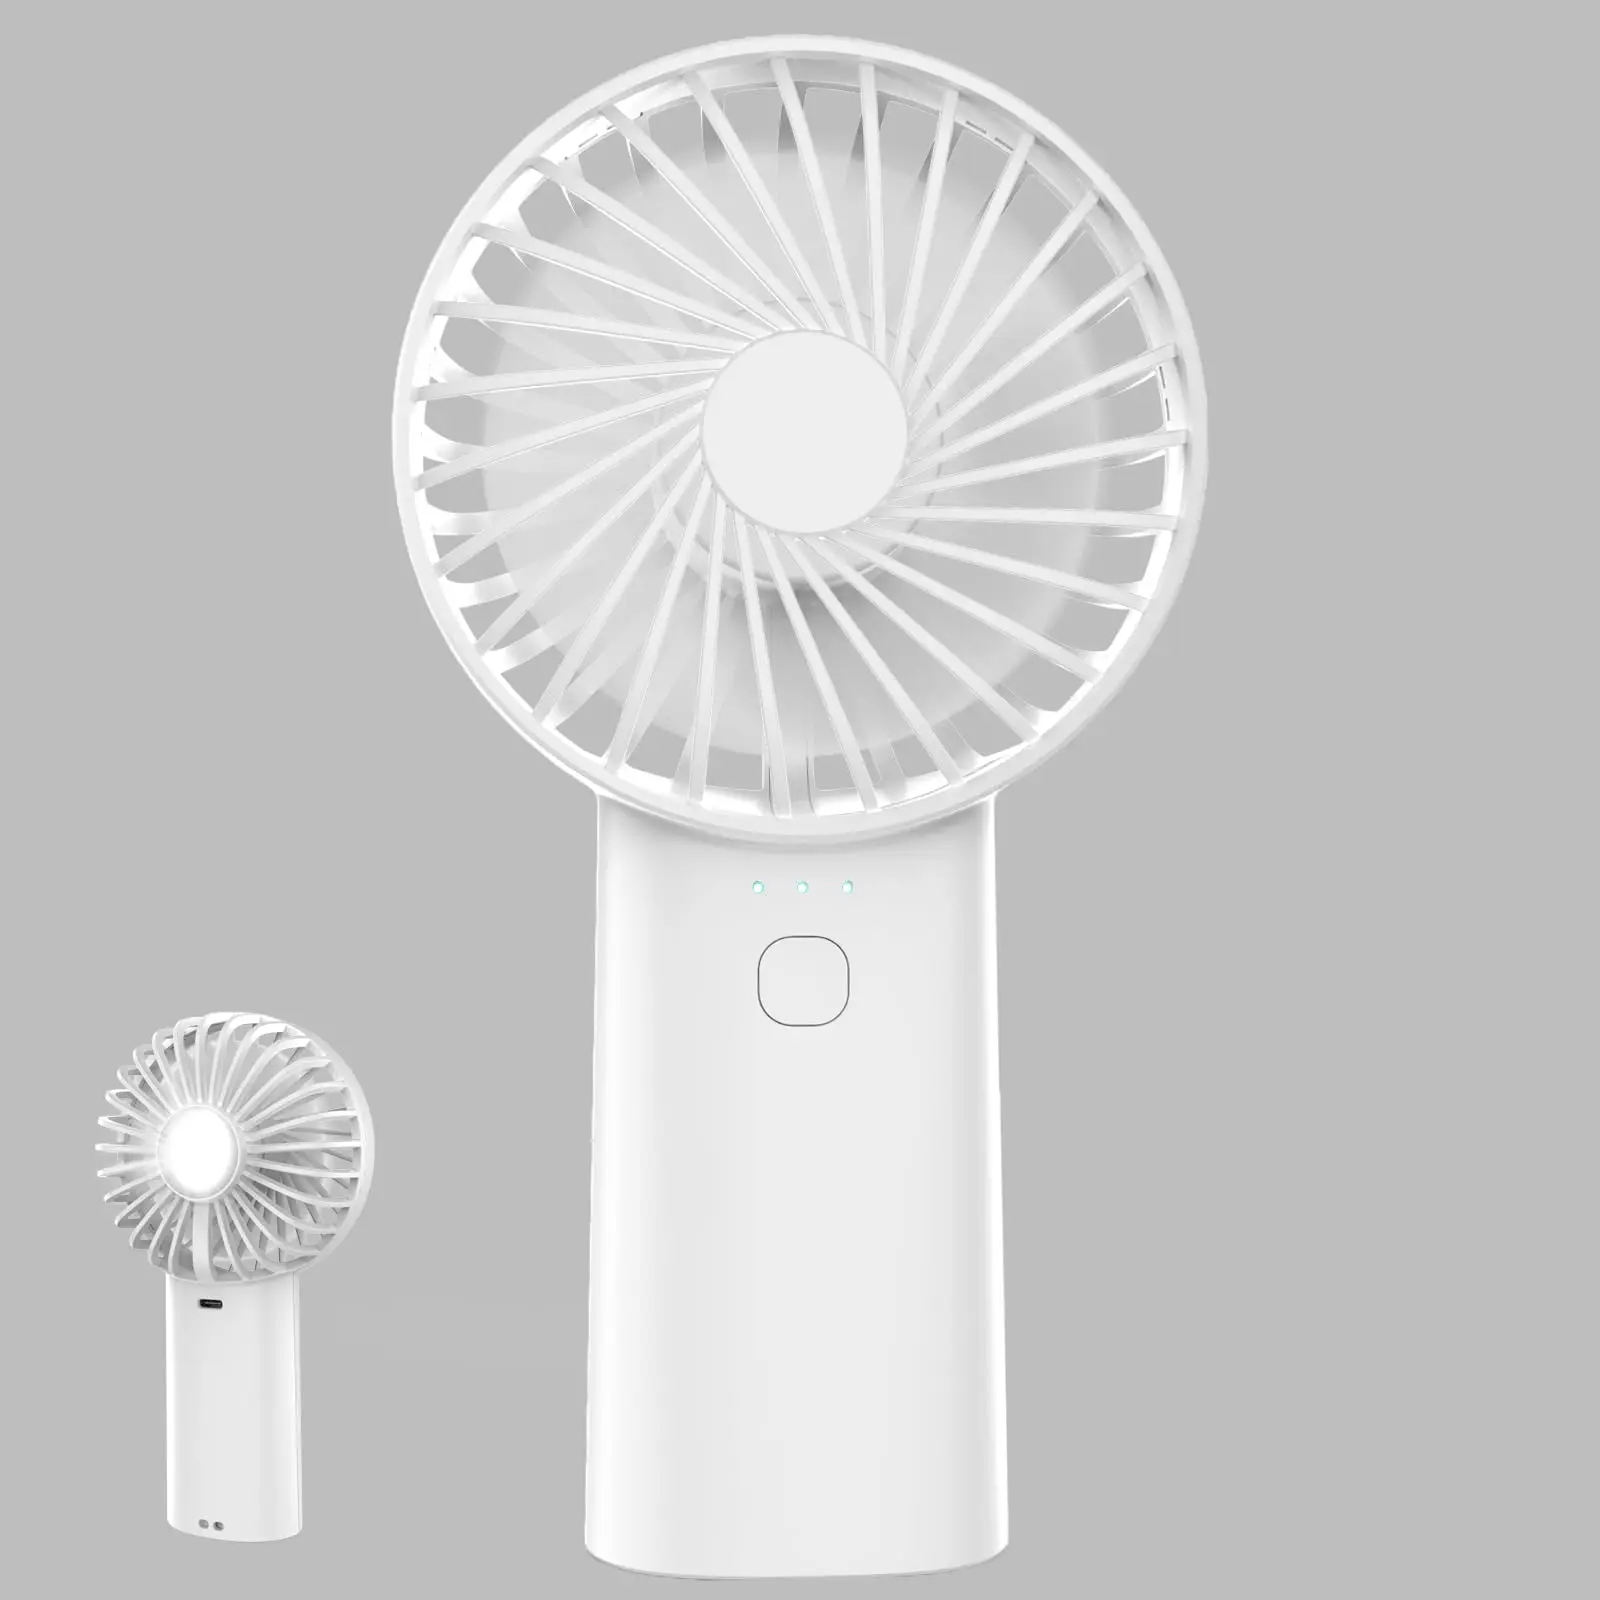 

Portable Handheld Fan 3 Speeds Powerful Personal Fans with Flashlight USB Rechargeable 2400mAh Battery Operated for Outdoor